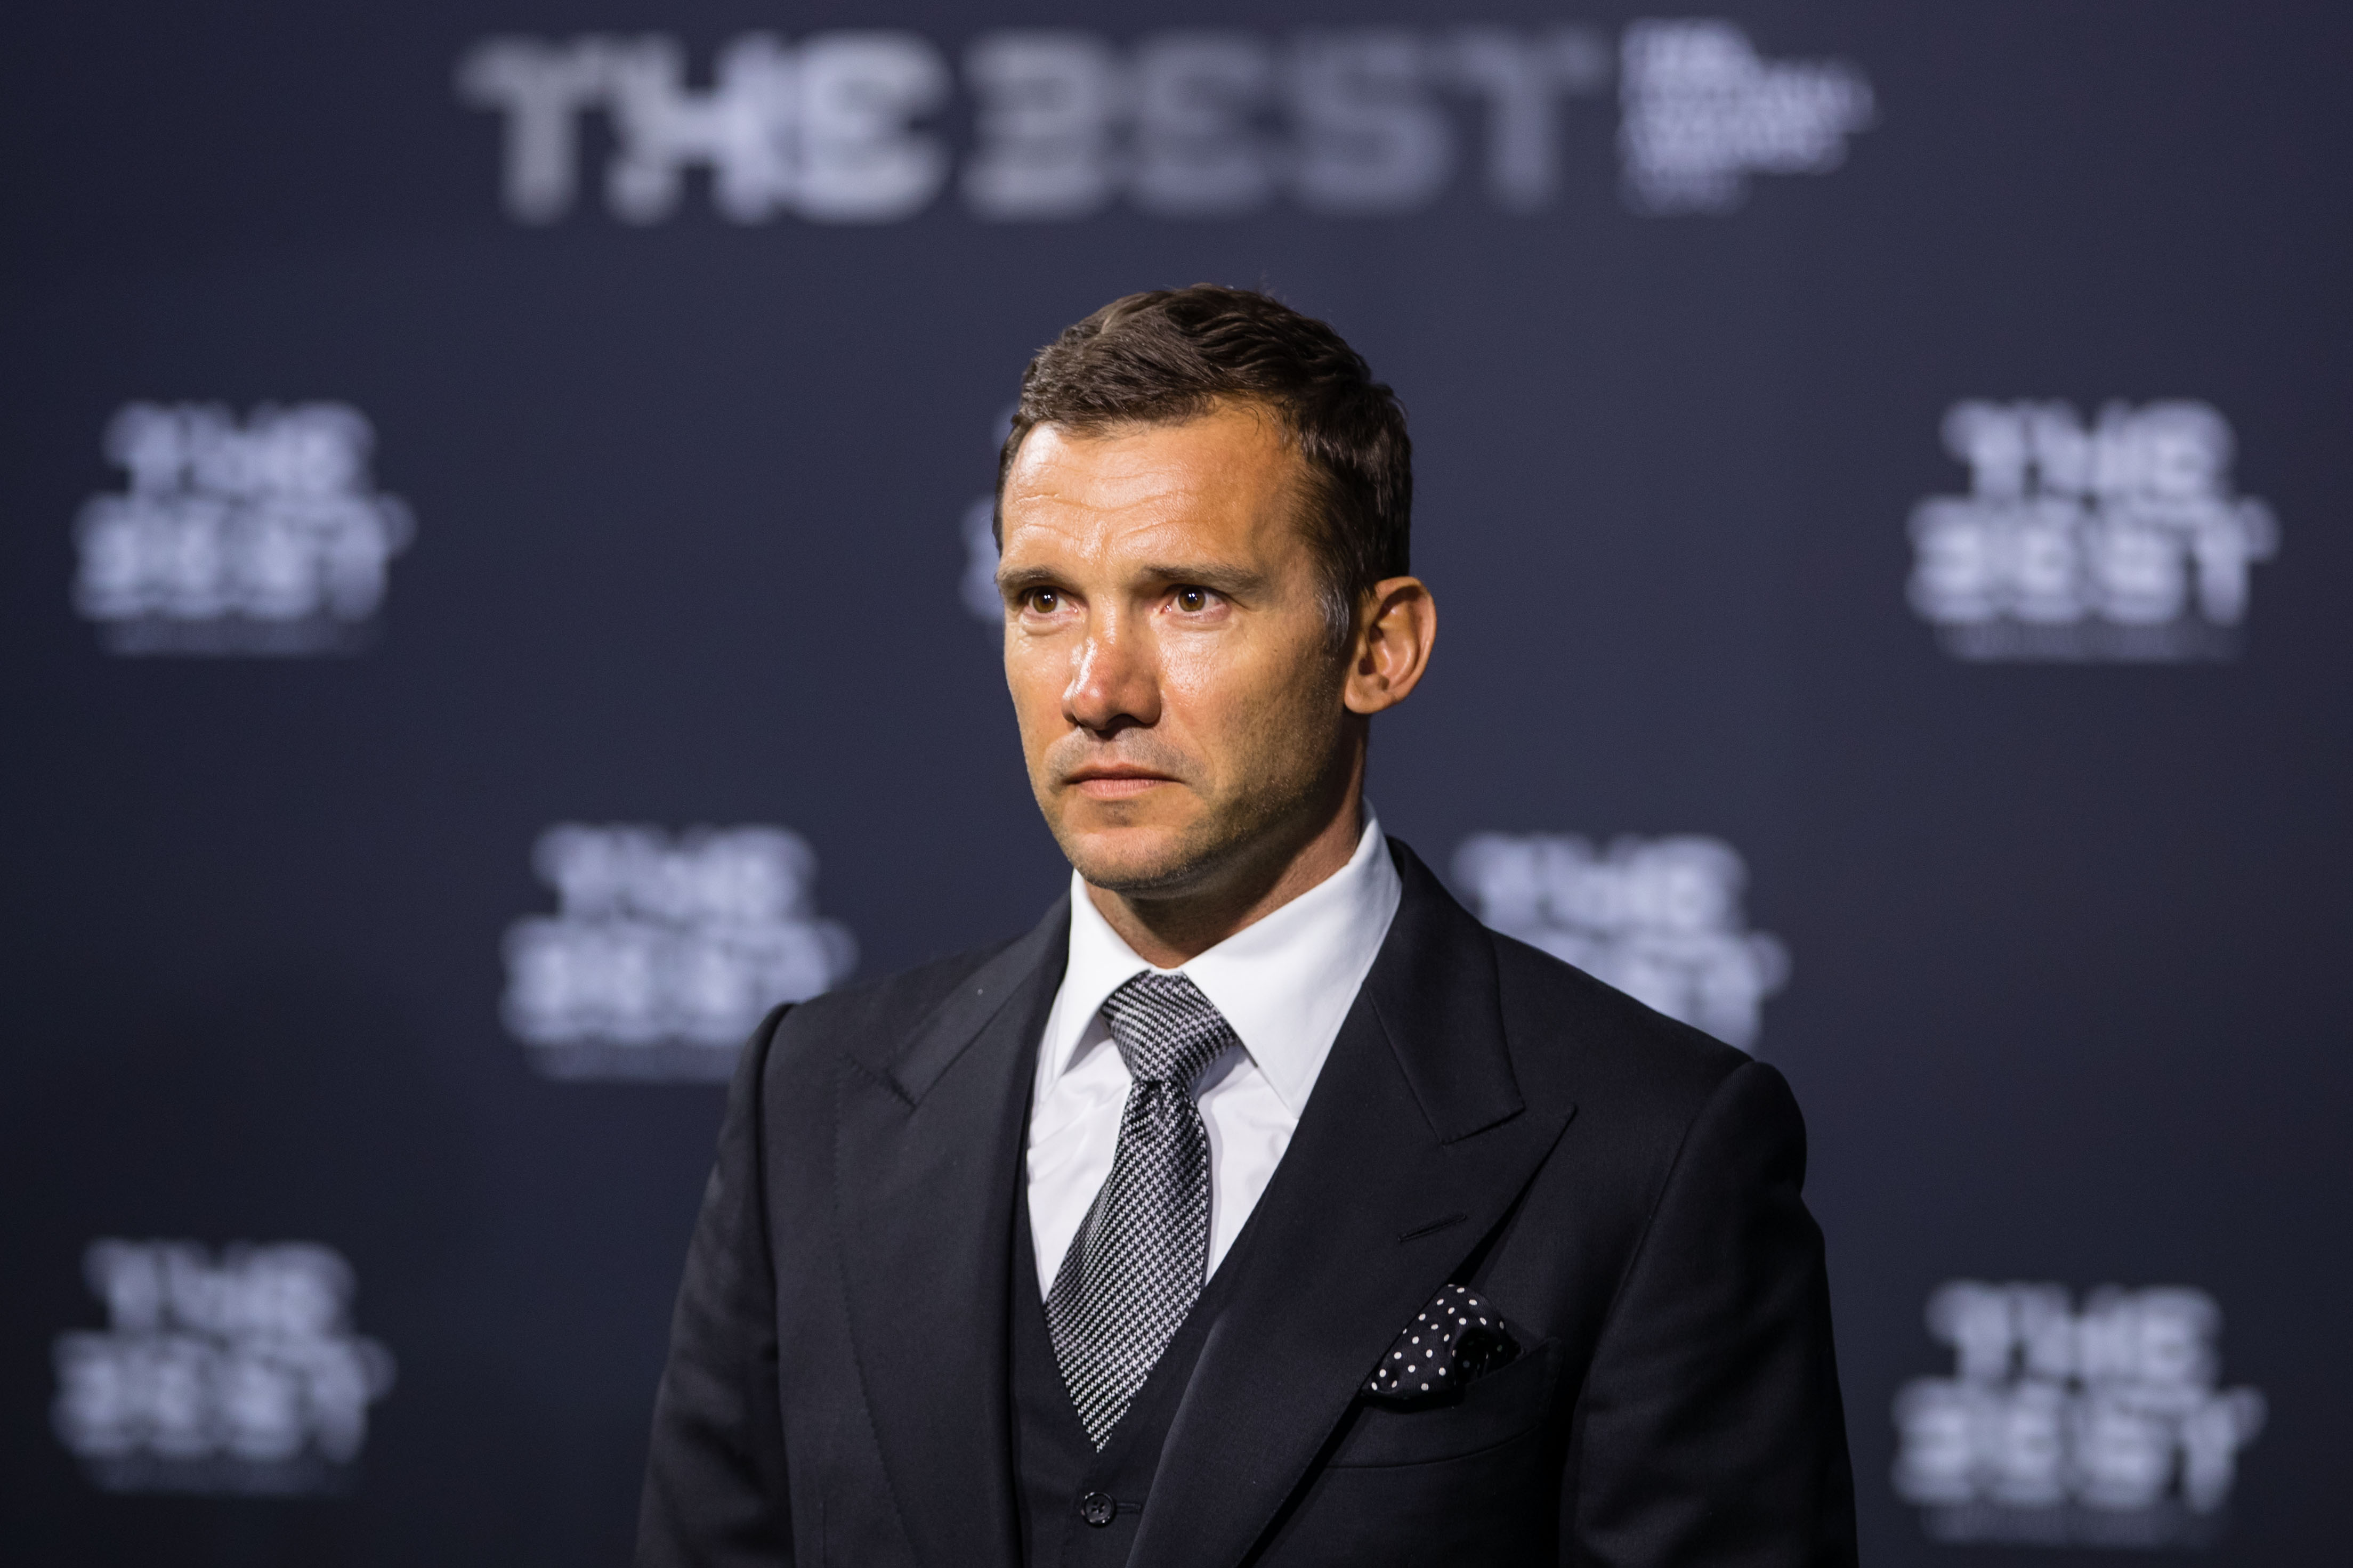 Rossoneri & Ukraine Legend Andriy Shevchenko: “Thank You To Inter & AC Milan For Their Message Of Solidarity & Peace”